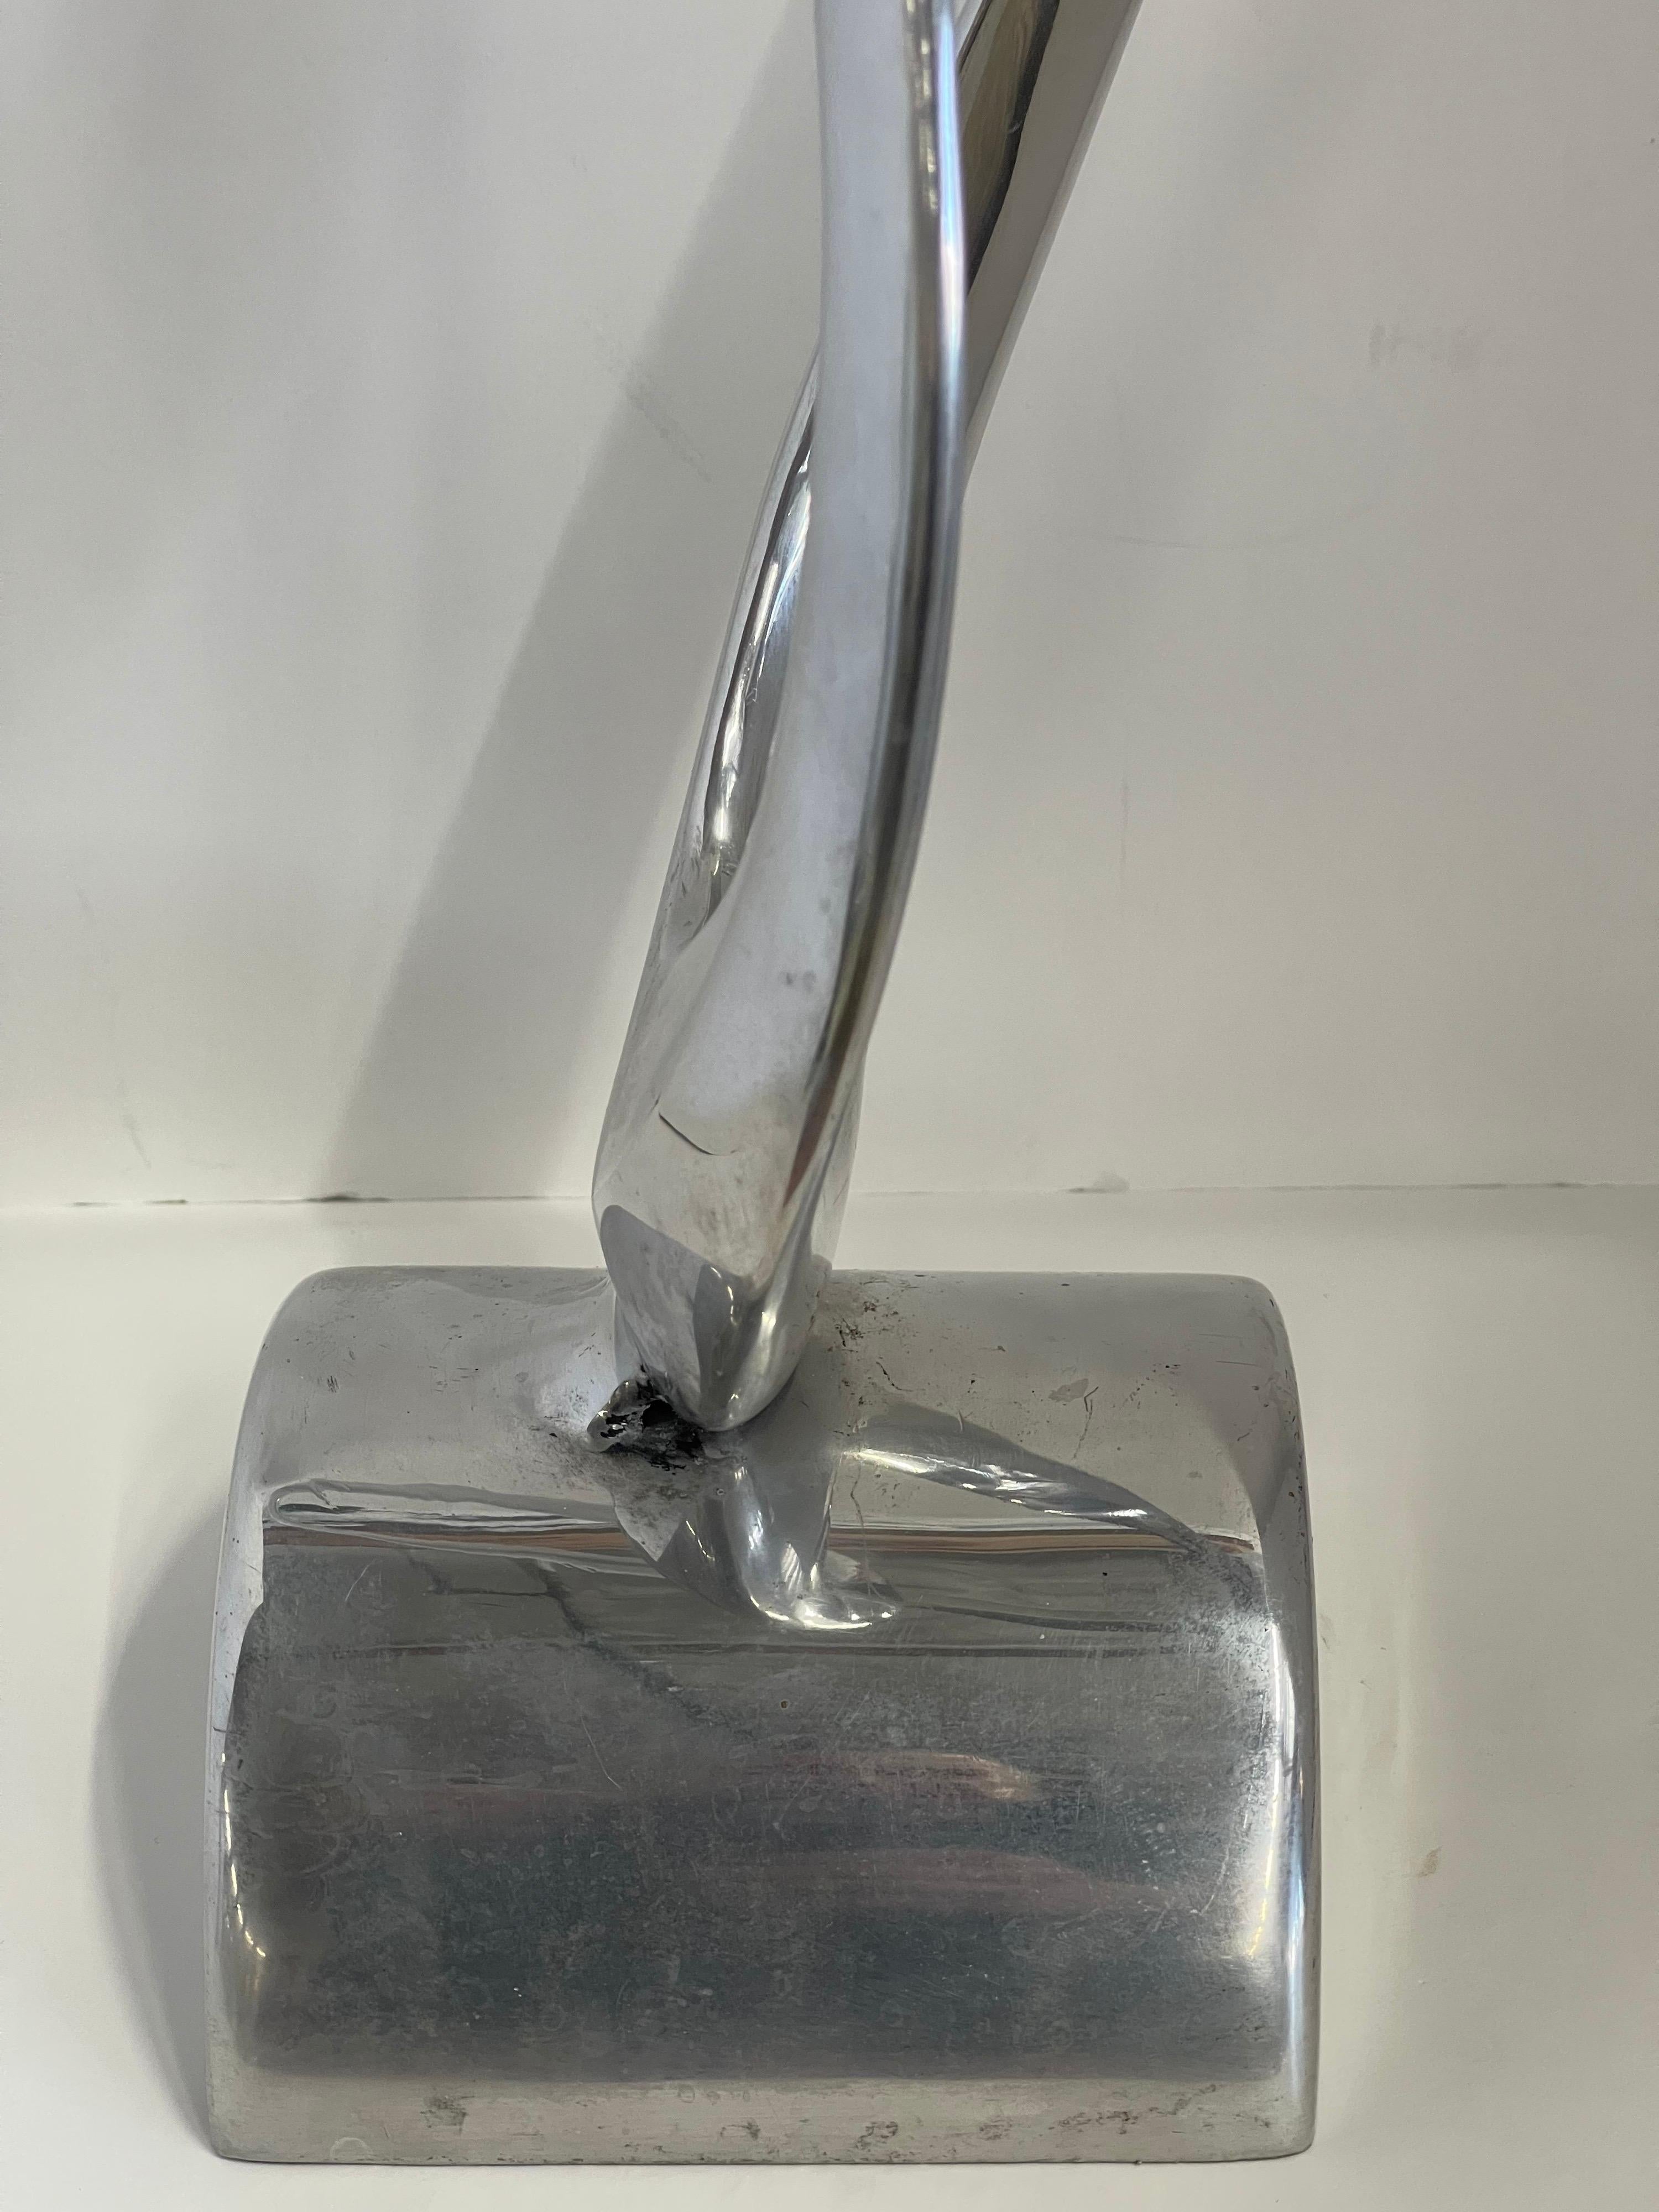 A wonderful flowing aluminum sculpture by the noted artist Bill Keating. Signed and dated 1980. In good vintage condition with some minor imperfections.